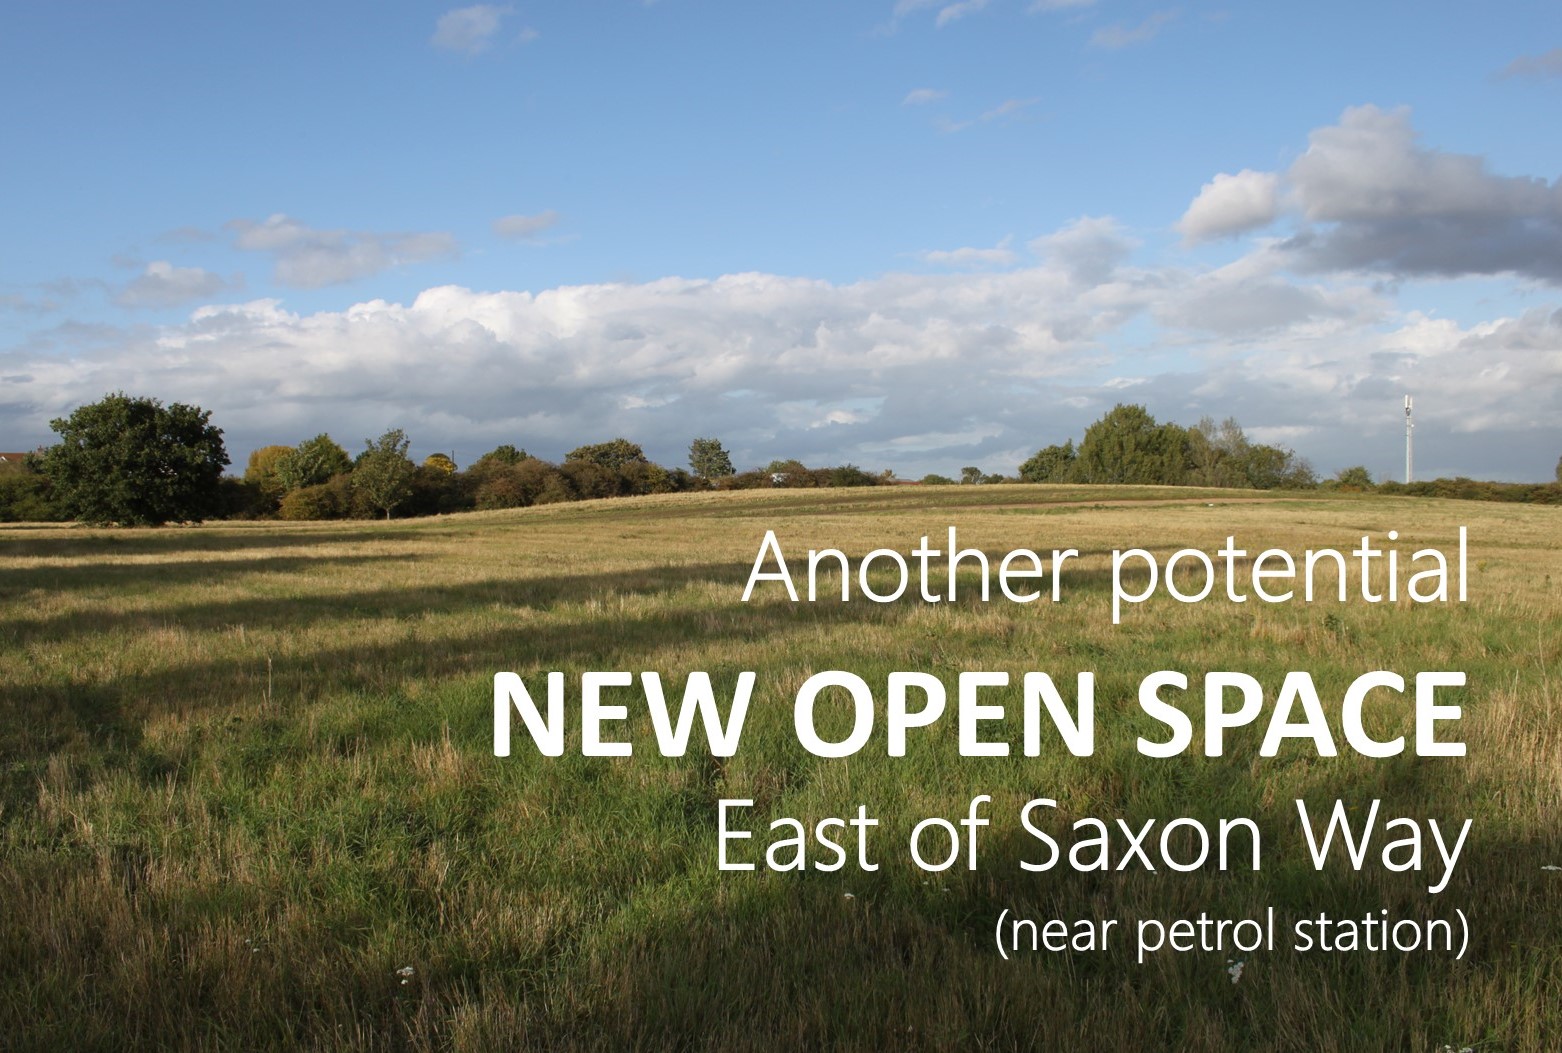 Potential New Open Space East of Saxon Way